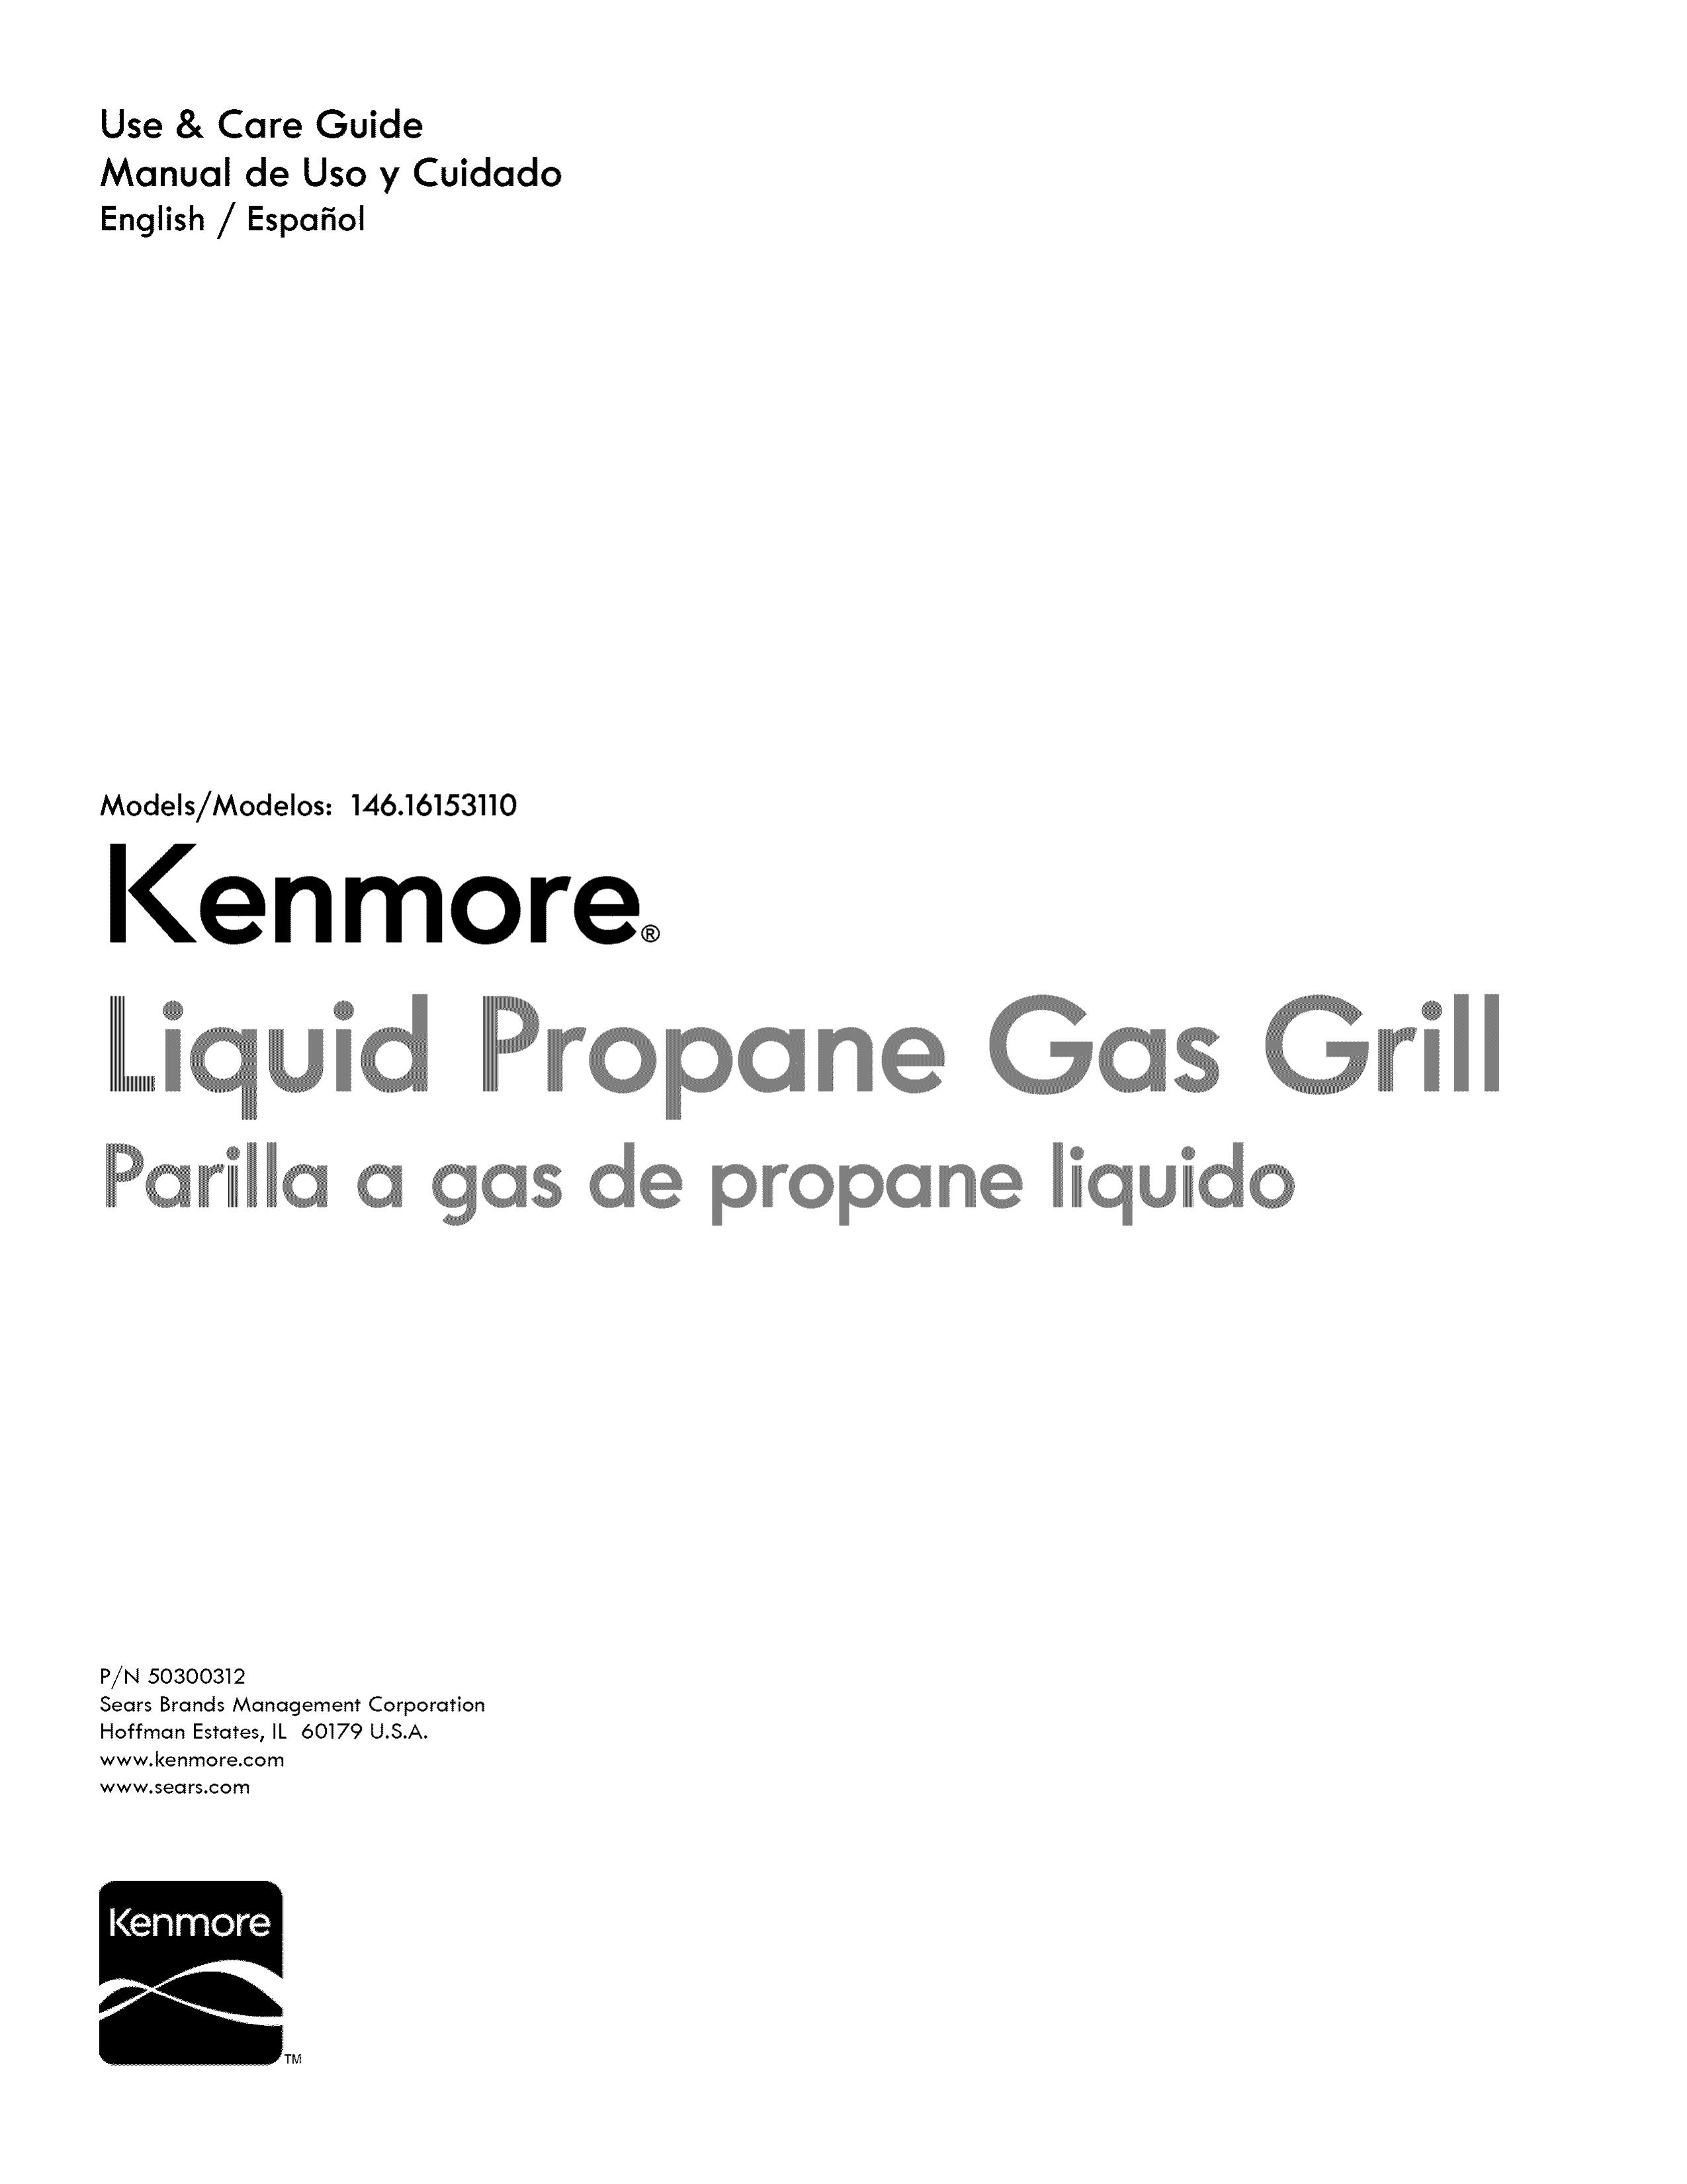 Kenmore 146.1615311 Gas Grill User Manual